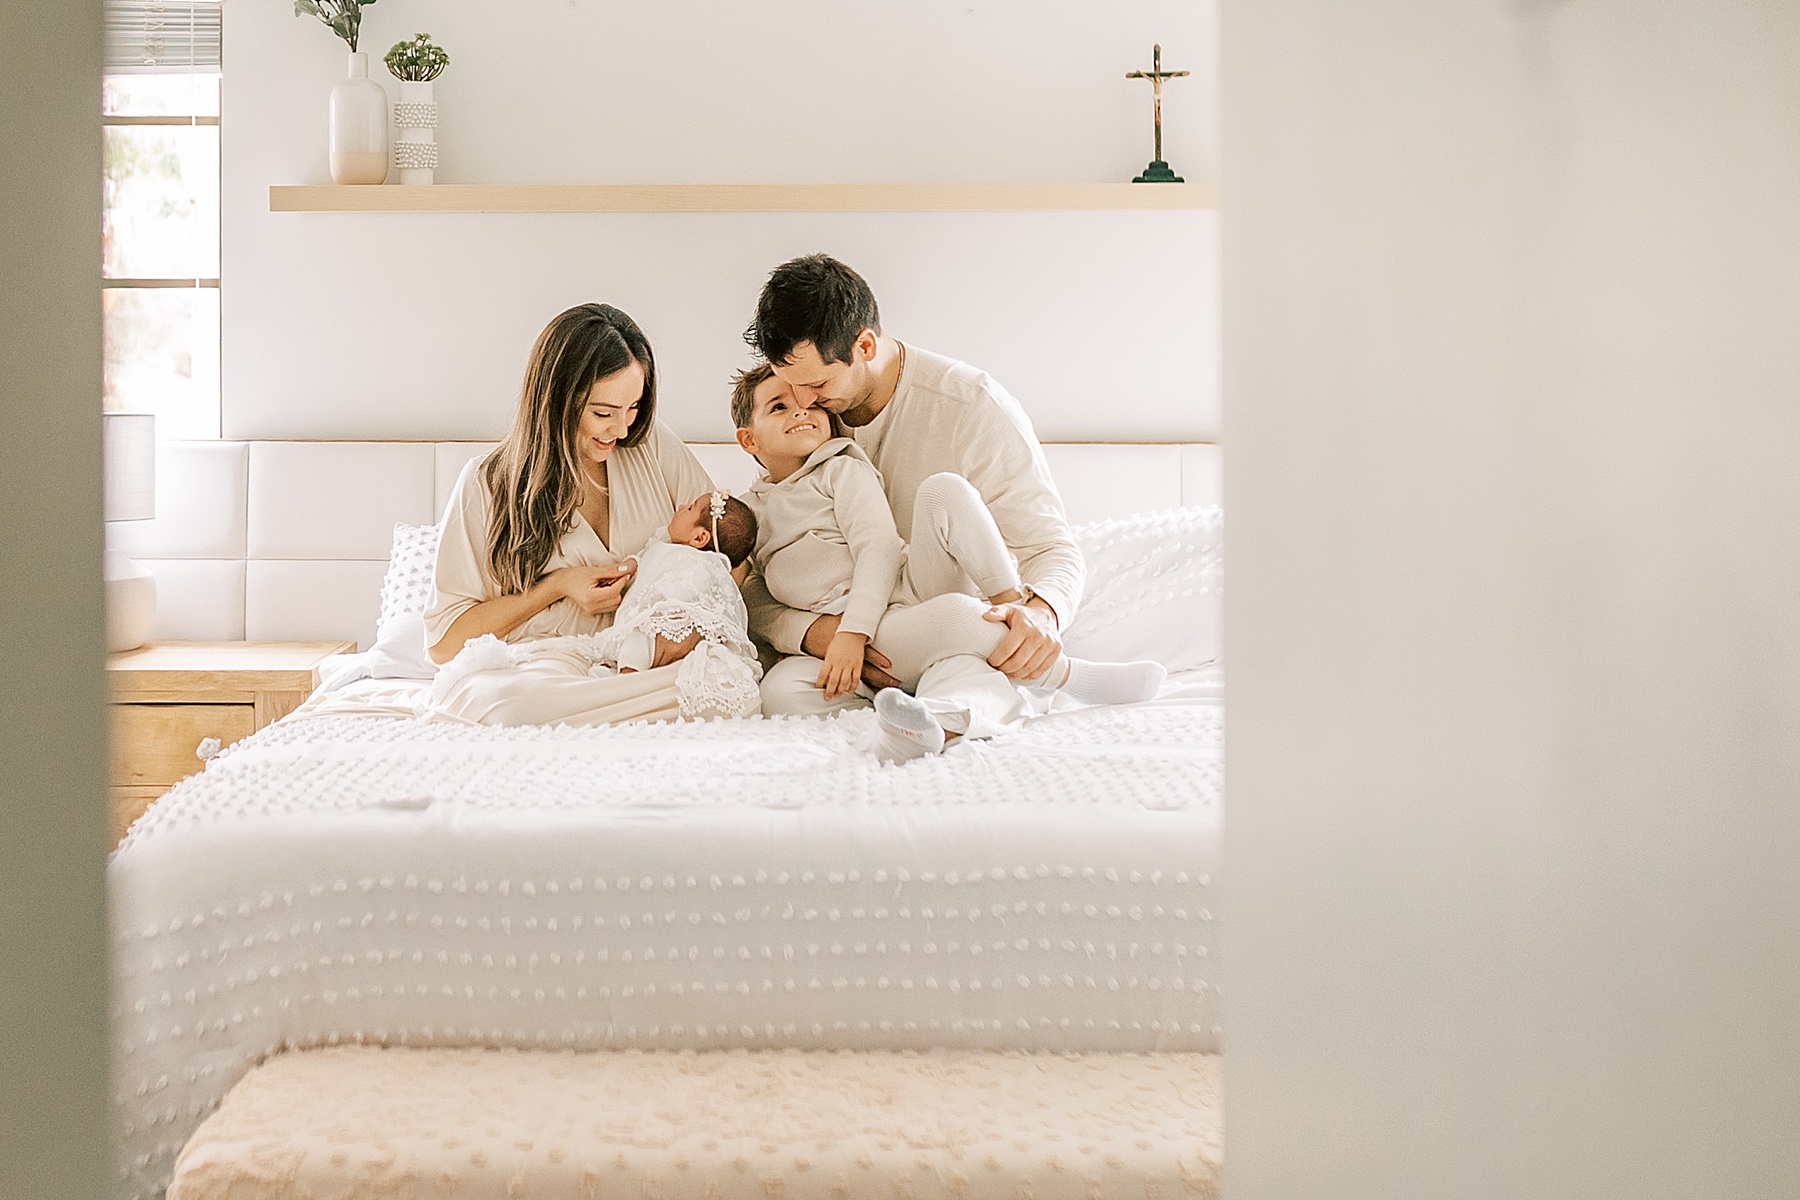 family dressed in tans and creams sitting on bed with white bedding holding baby girl